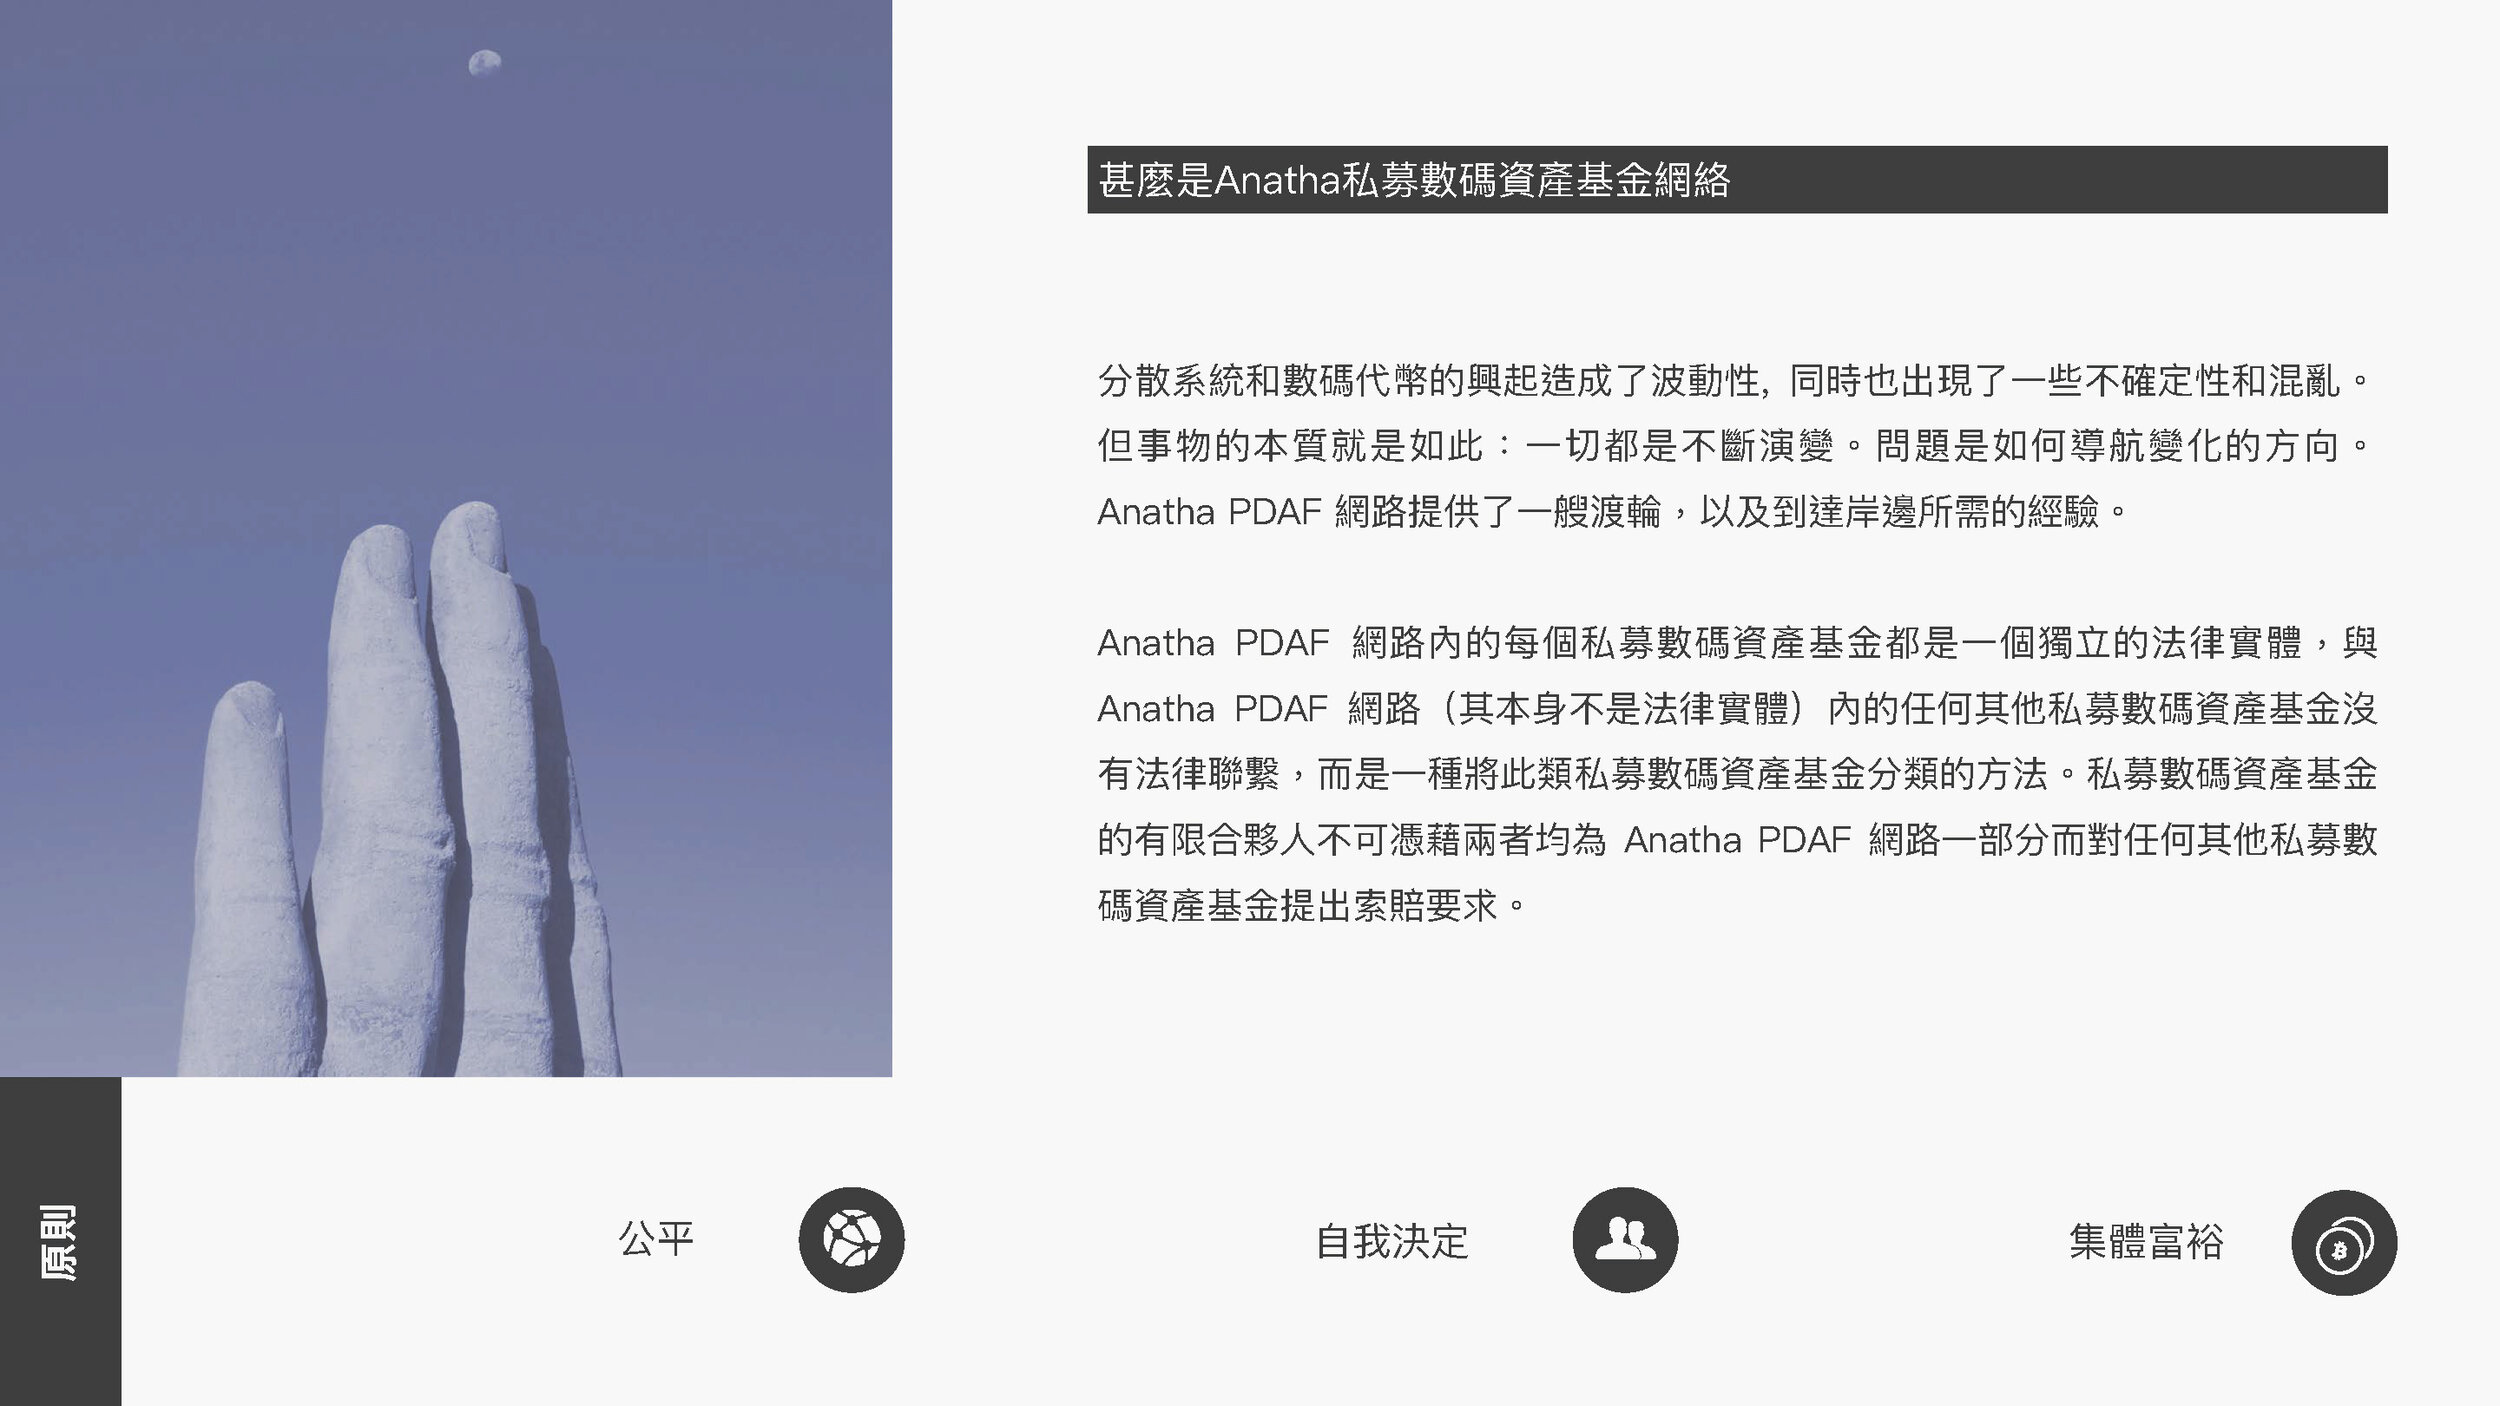 Anatha Pitch Deck - Traditional Chinese_Page_04.jpg